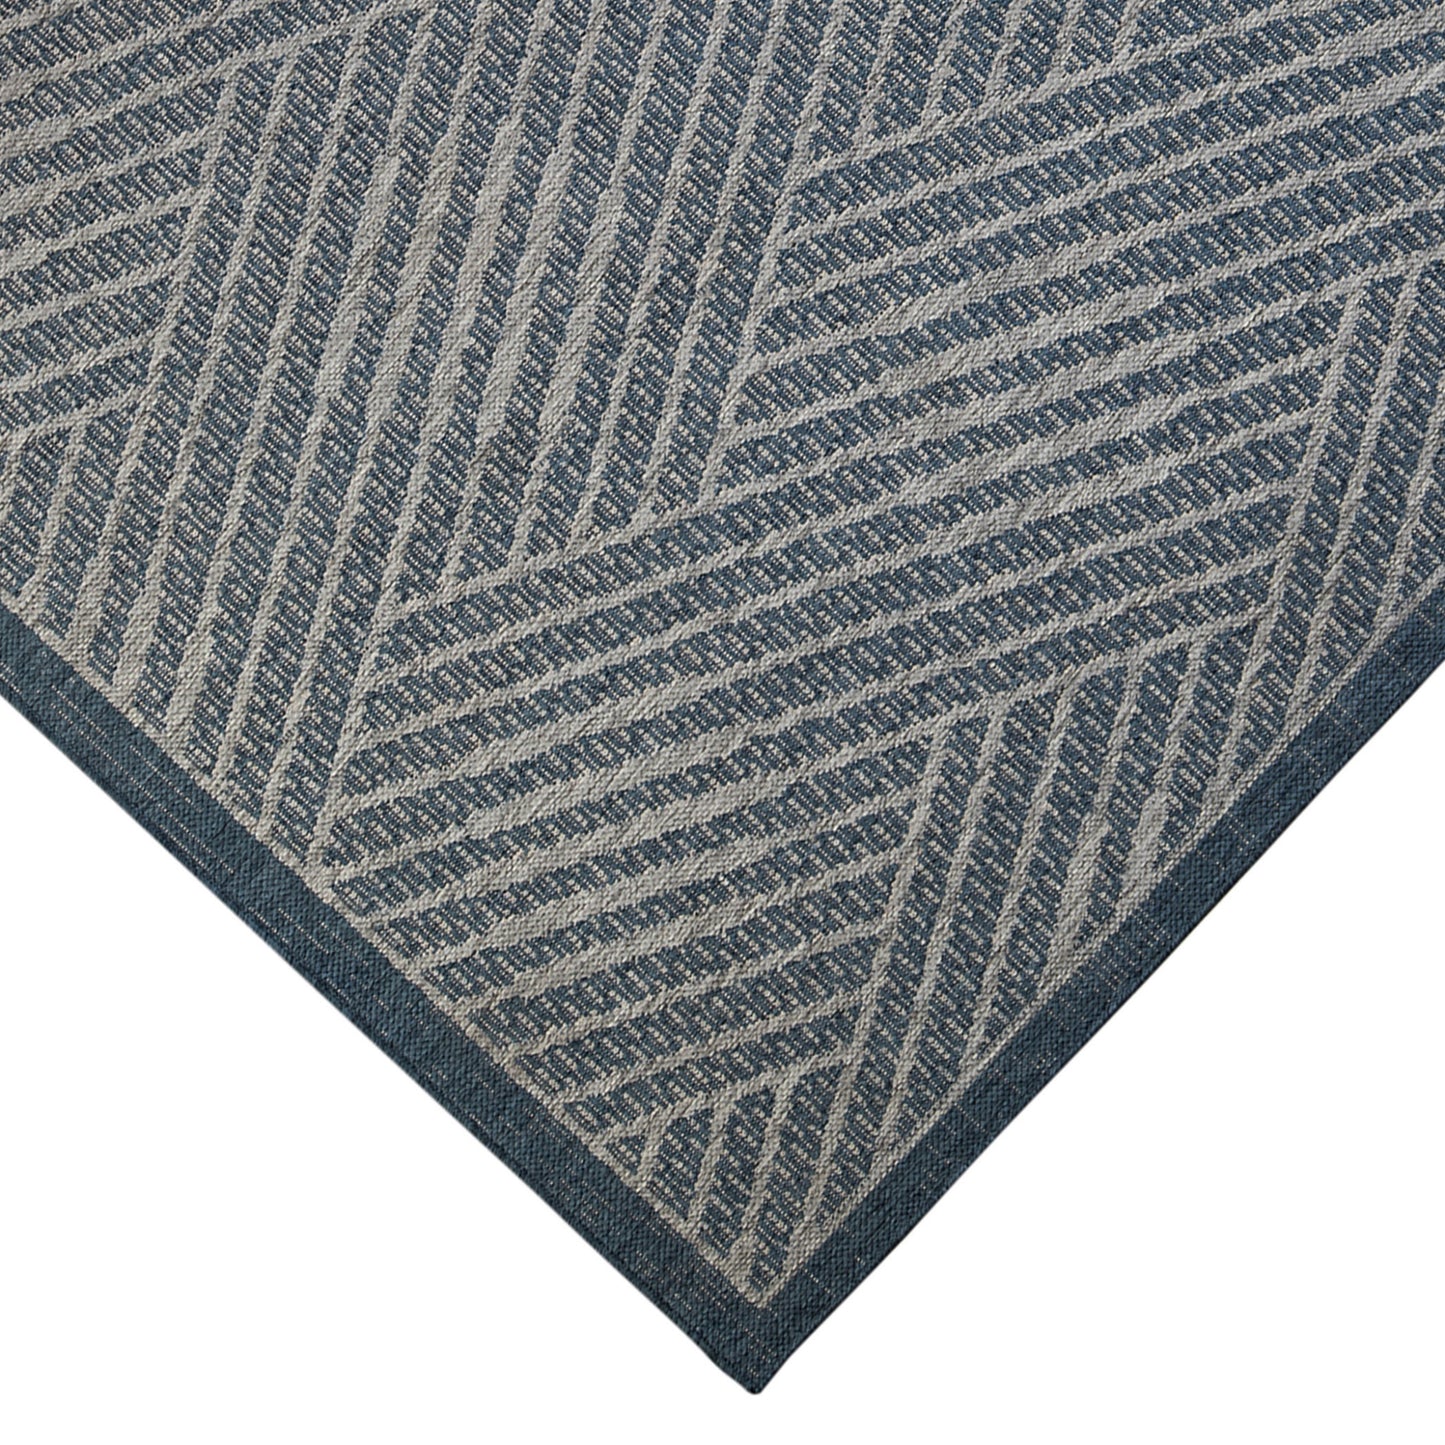 2' x 3' Gray and Blue Geometric Stain Resistant Indoor Outdoor Area Rug